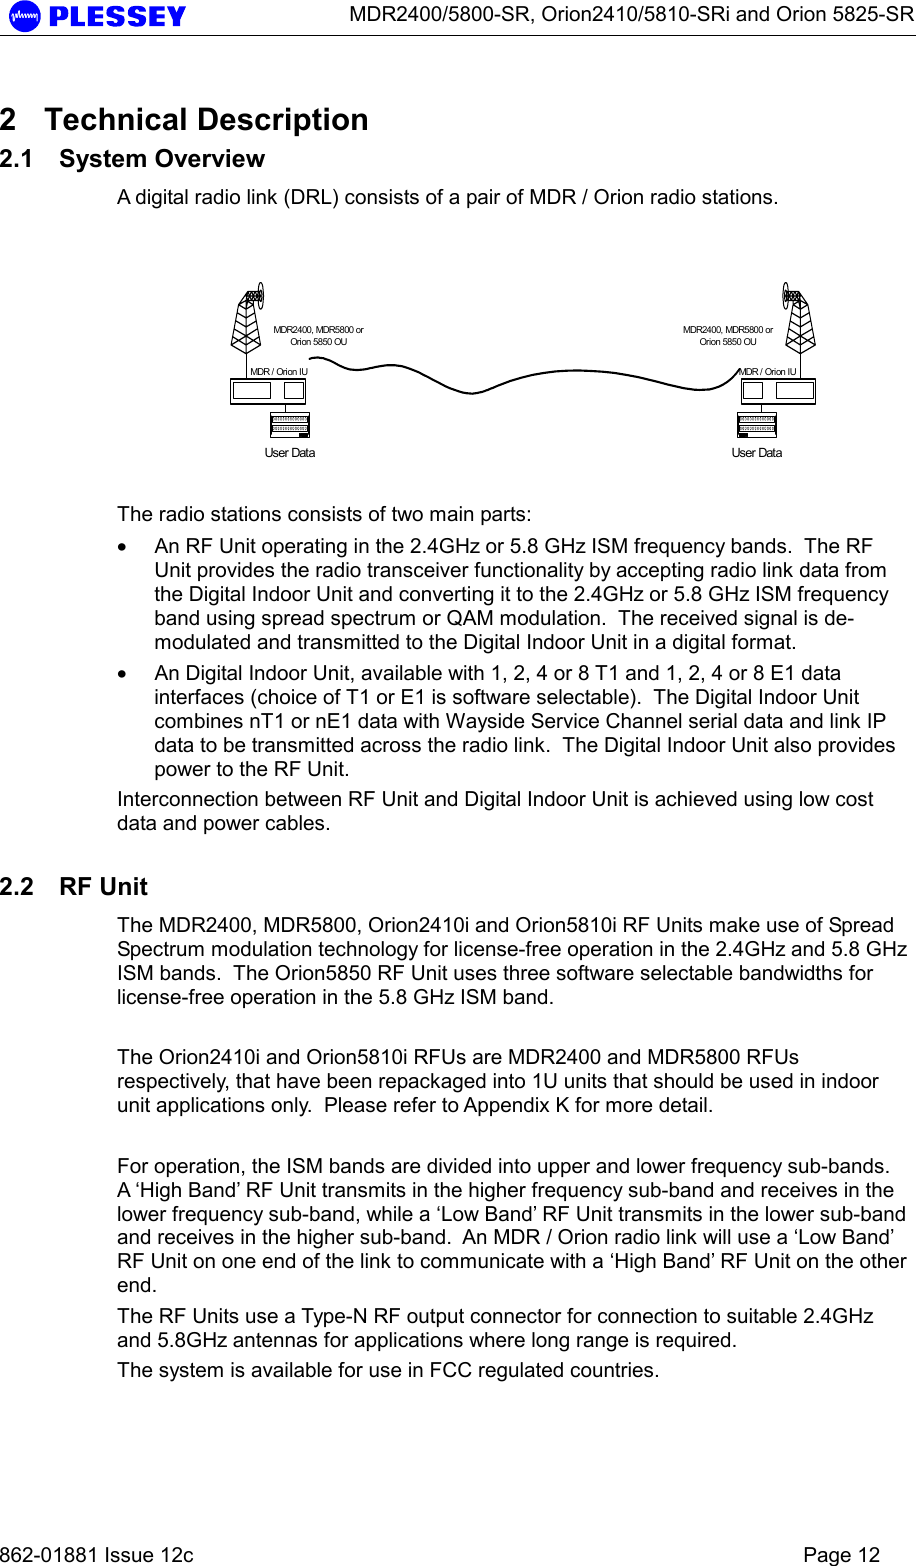      MDR2400/5800-SR, Orion2410/5810-SRi and Orion 5825-SR   862-01881 Issue 12c    Page 12 2 Technical Description 2.1 System Overview A digital radio link (DRL) consists of a pair of MDR / Orion radio stations.    The radio stations consists of two main parts: • An RF Unit operating in the 2.4GHz or 5.8 GHz ISM frequency bands.  The RF Unit provides the radio transceiver functionality by accepting radio link data from the Digital Indoor Unit and converting it to the 2.4GHz or 5.8 GHz ISM frequency band using spread spectrum or QAM modulation.  The received signal is de-modulated and transmitted to the Digital Indoor Unit in a digital format. • An Digital Indoor Unit, available with 1, 2, 4 or 8 T1 and 1, 2, 4 or 8 E1 data interfaces (choice of T1 or E1 is software selectable).  The Digital Indoor Unit combines nT1 or nE1 data with Wayside Service Channel serial data and link IP data to be transmitted across the radio link.  The Digital Indoor Unit also provides power to the RF Unit. Interconnection between RF Unit and Digital Indoor Unit is achieved using low cost data and power cables.  2.2 RF Unit The MDR2400, MDR5800, Orion2410i and Orion5810i RF Units make use of Spread Spectrum modulation technology for license-free operation in the 2.4GHz and 5.8 GHz ISM bands.  The Orion5850 RF Unit uses three software selectable bandwidths for license-free operation in the 5.8 GHz ISM band.  The Orion2410i and Orion5810i RFUs are MDR2400 and MDR5800 RFUs respectively, that have been repackaged into 1U units that should be used in indoor unit applications only.  Please refer to Appendix K for more detail.  For operation, the ISM bands are divided into upper and lower frequency sub-bands.  A ‘High Band’ RF Unit transmits in the higher frequency sub-band and receives in the lower frequency sub-band, while a ‘Low Band’ RF Unit transmits in the lower sub-band and receives in the higher sub-band.  An MDR / Orion radio link will use a ‘Low Band’ RF Unit on one end of the link to communicate with a ‘High Band’ RF Unit on the other end. The RF Units use a Type-N RF output connector for connection to suitable 2.4GHz and 5.8GHz antennas for applications where long range is required. The system is available for use in FCC regulated countries. User DataMDR2400, MDR5800 orOrion 5850 OUMDR / Orion IUUser DataMDR2400, MDR5800 orOrion 5850 OUMDR / Orion IU